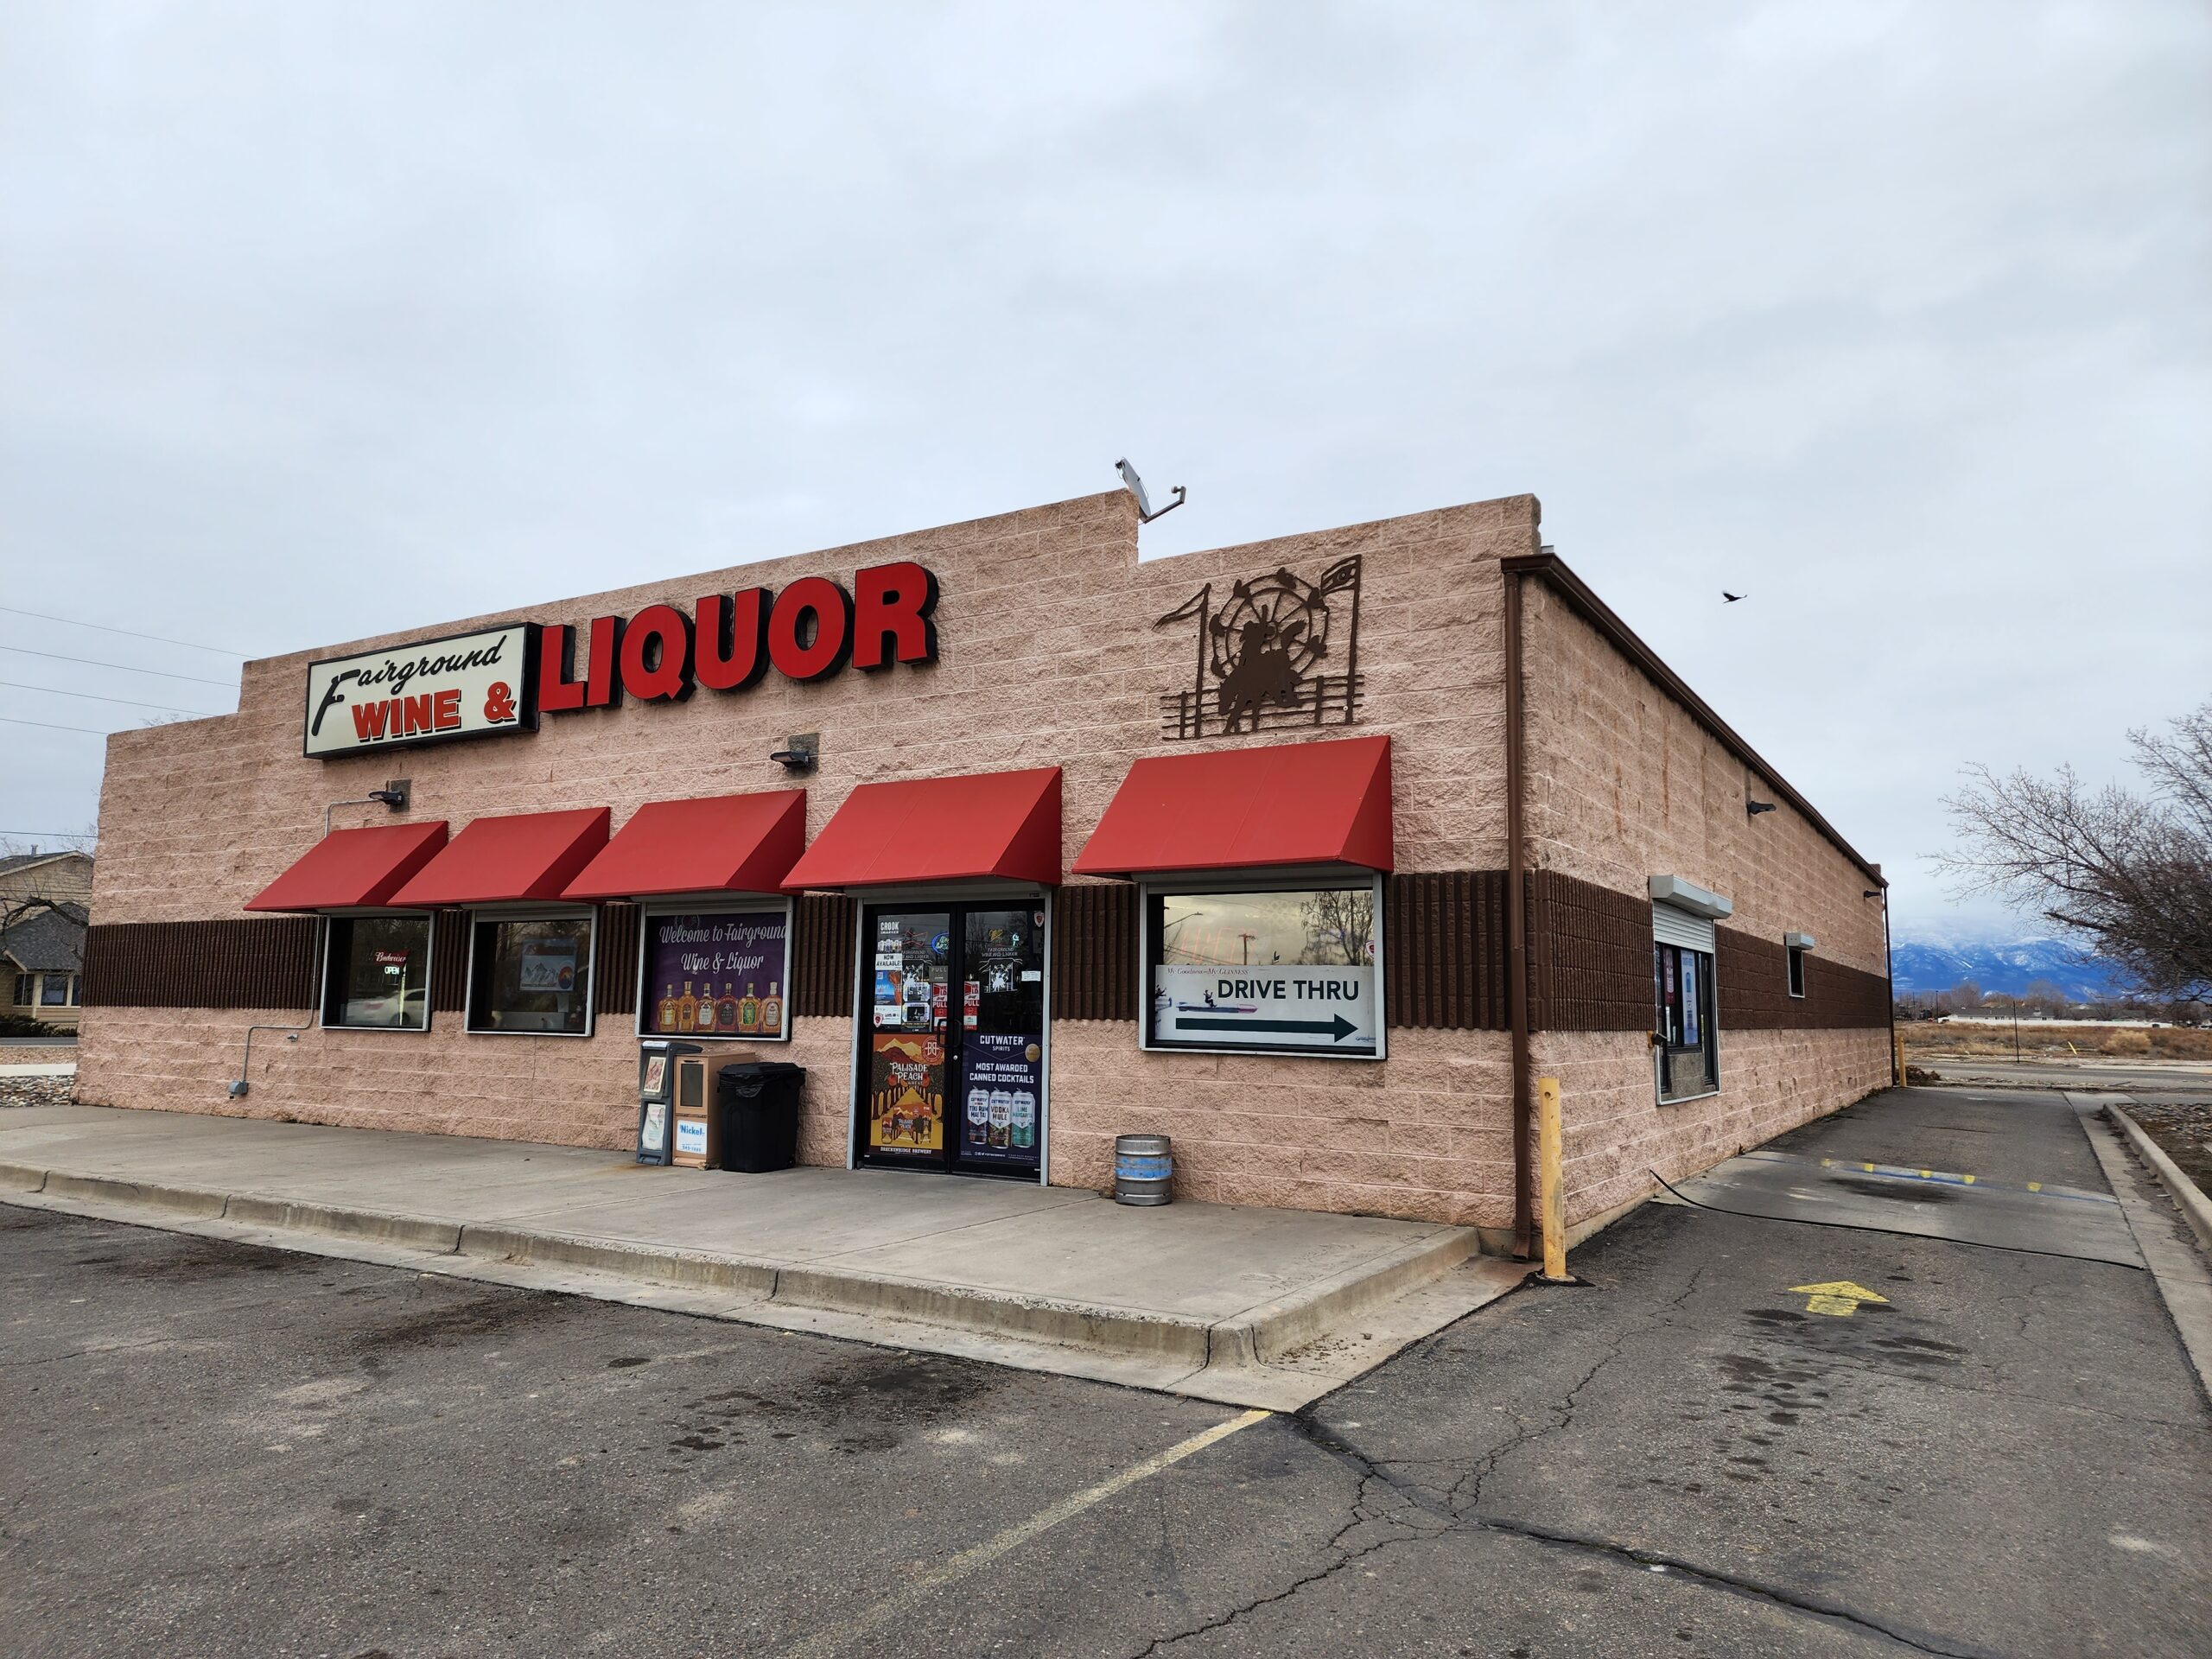 Great opportunity to own an established liquor store with more than twenty years in business